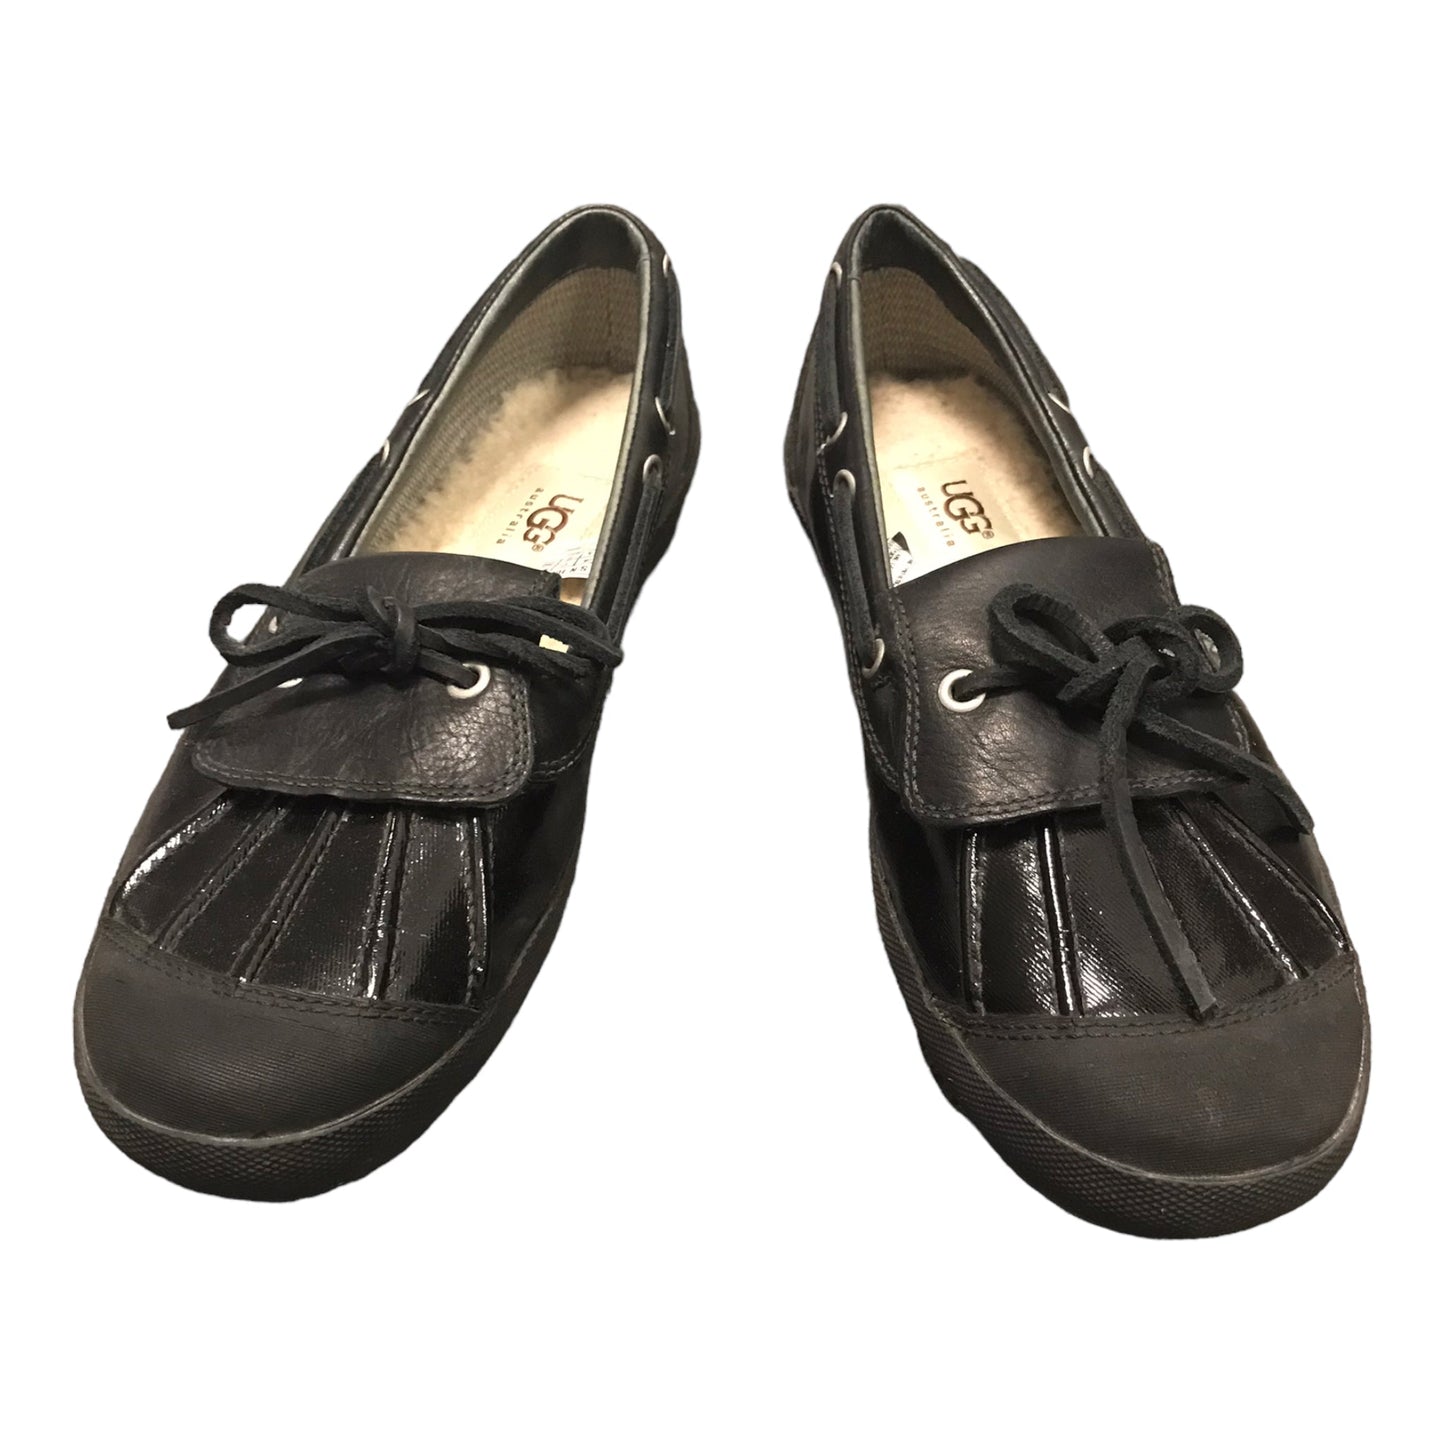 Shoes Flats Loafer Oxford By Ugg  Size: 8